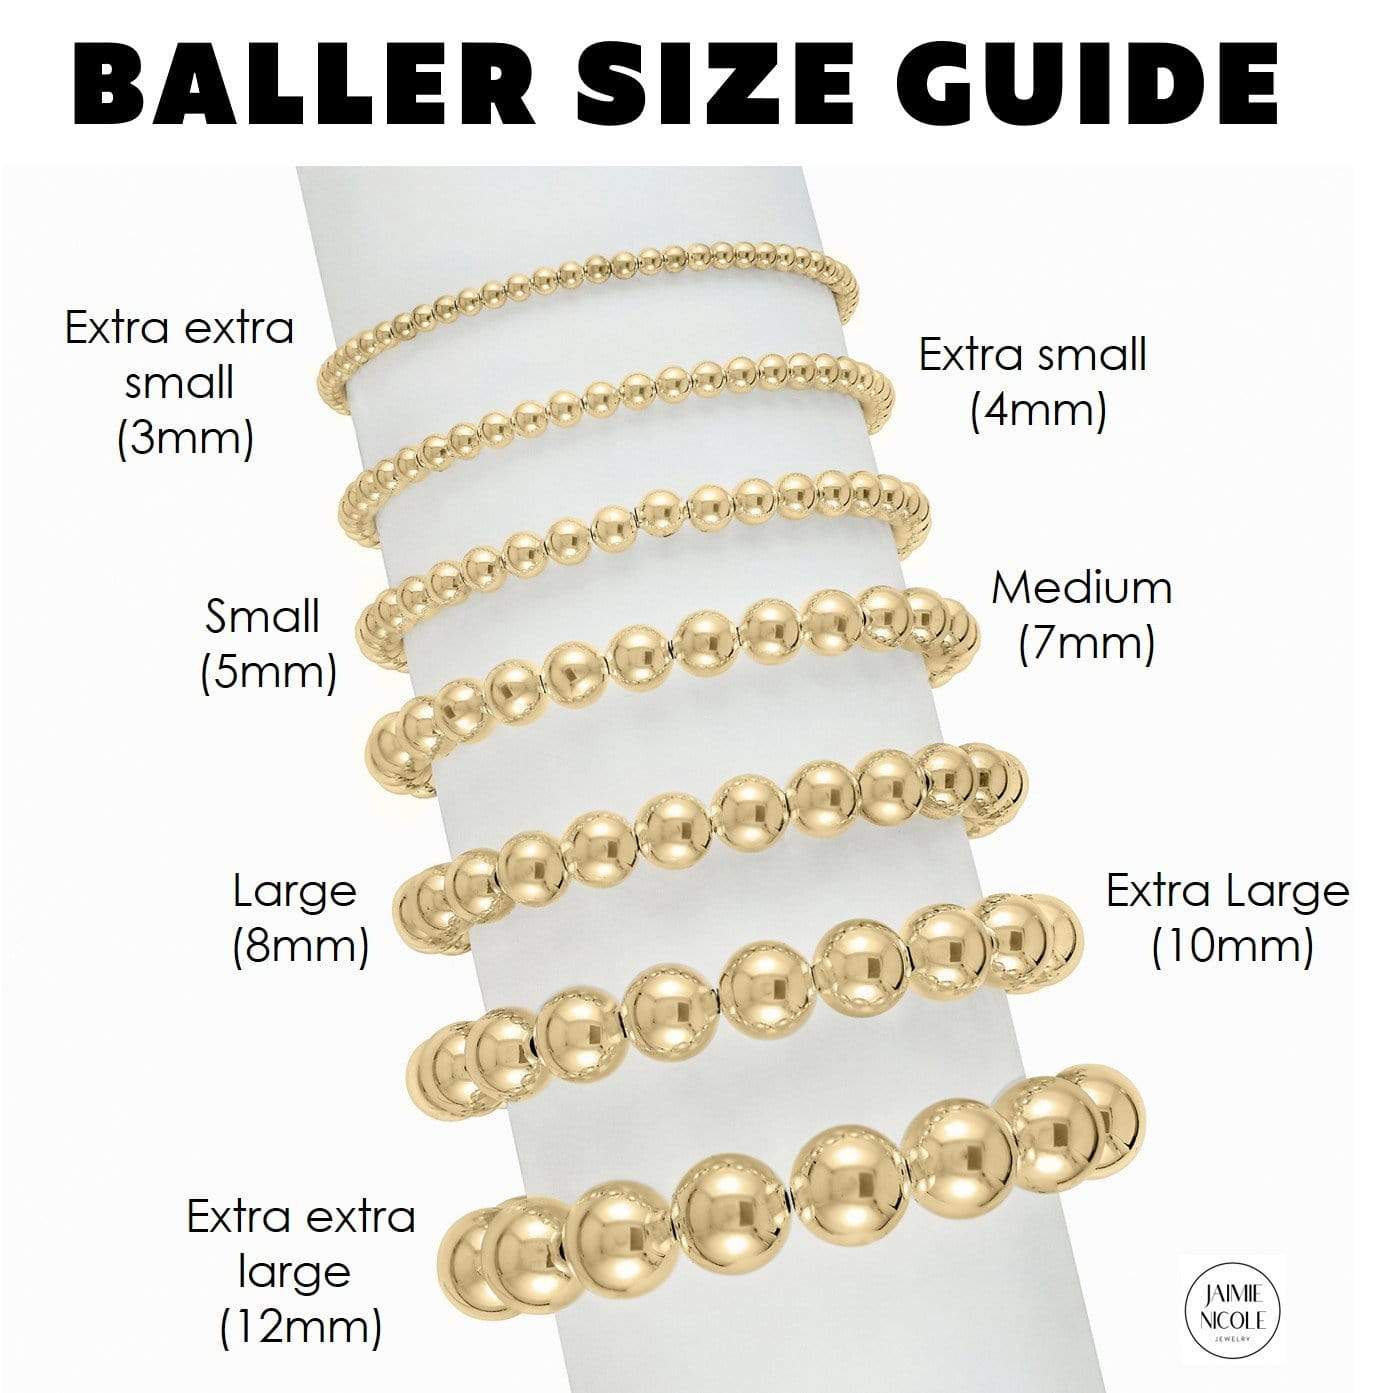 Extra Large Baller | Gold + Silver Bracelet by Jaimie Nicole Jewelry